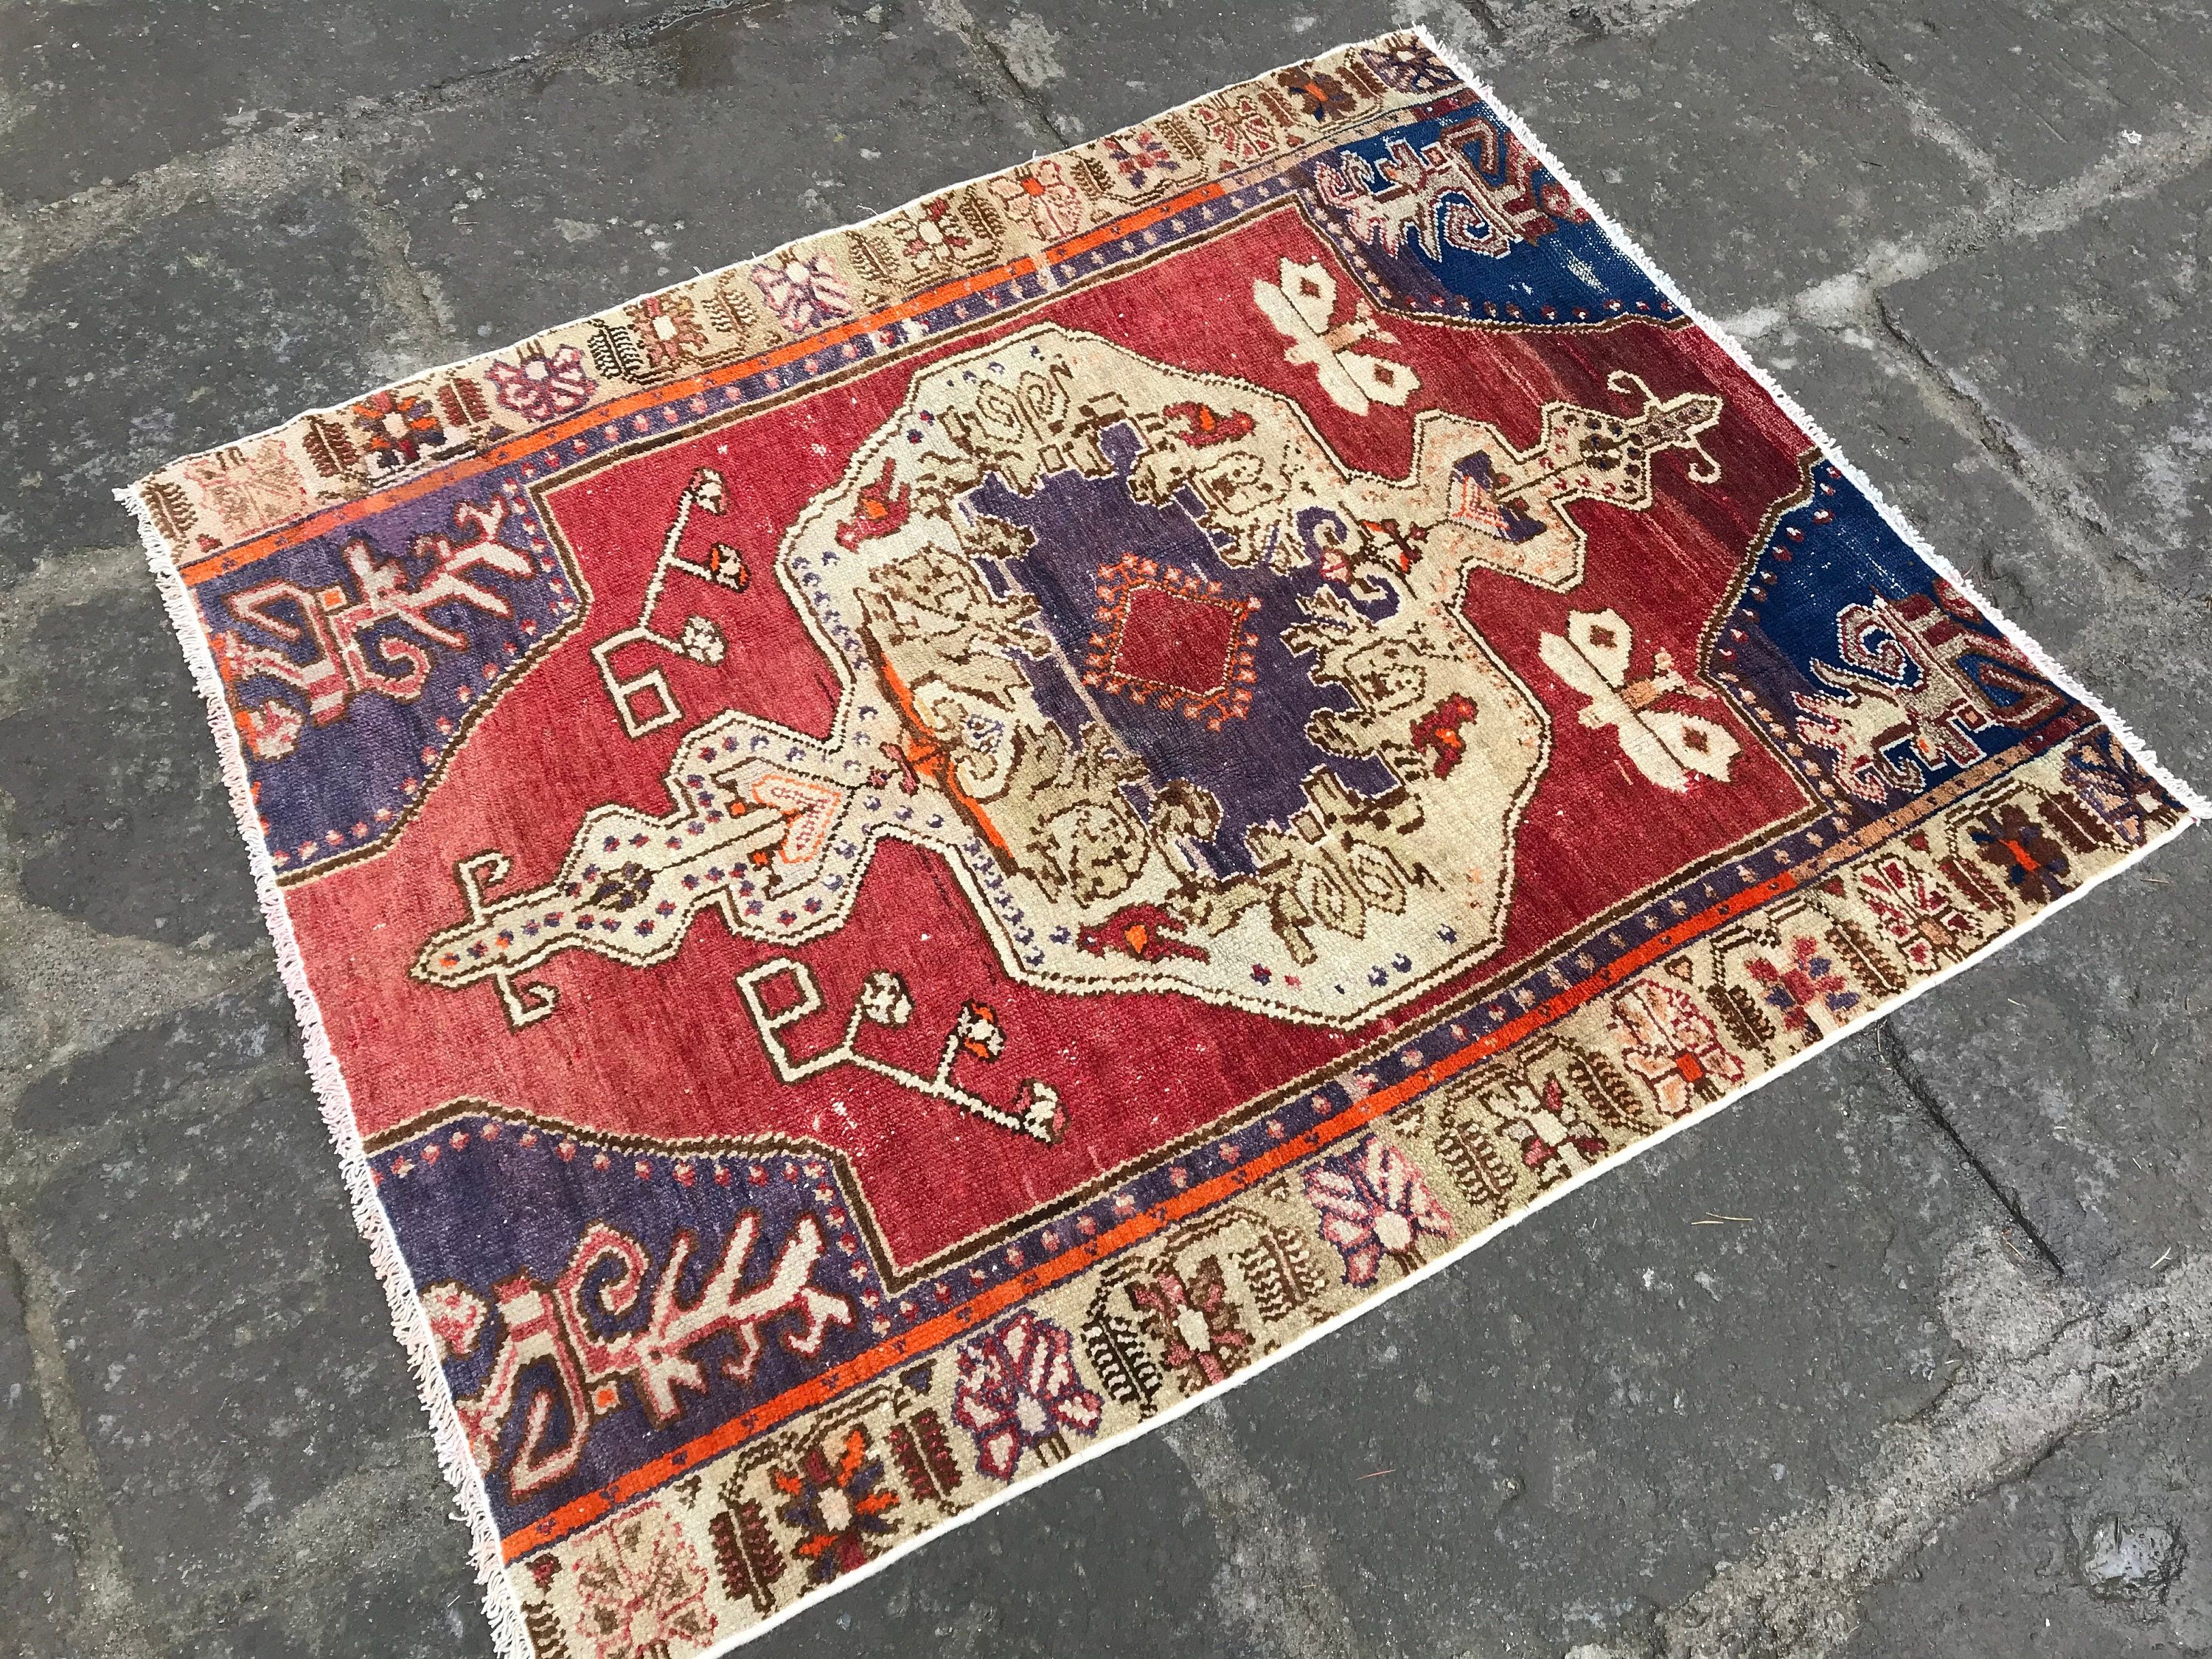 Rugs for Bath, Cool Rugs, Entry Rug, Wall Hanging Rugs, Turkish Rugs, Red Oriental Rug, Vintage Rugs, 3.5x4.2 ft Small Rugs, Antique Rug